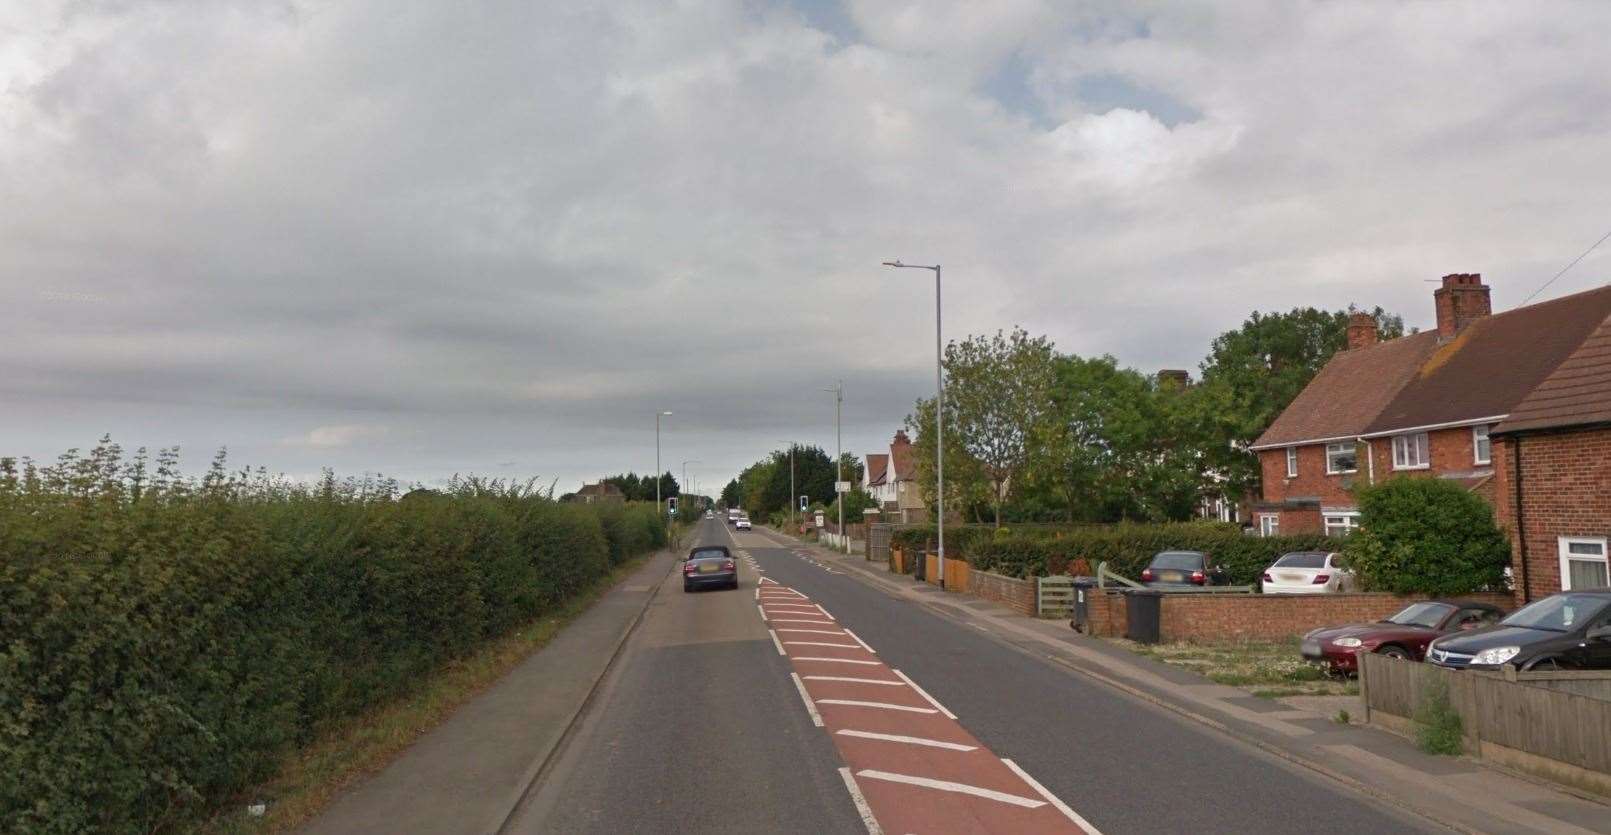 Island Road, Sturry, where the man attacked vehicles including a bus (19218084)